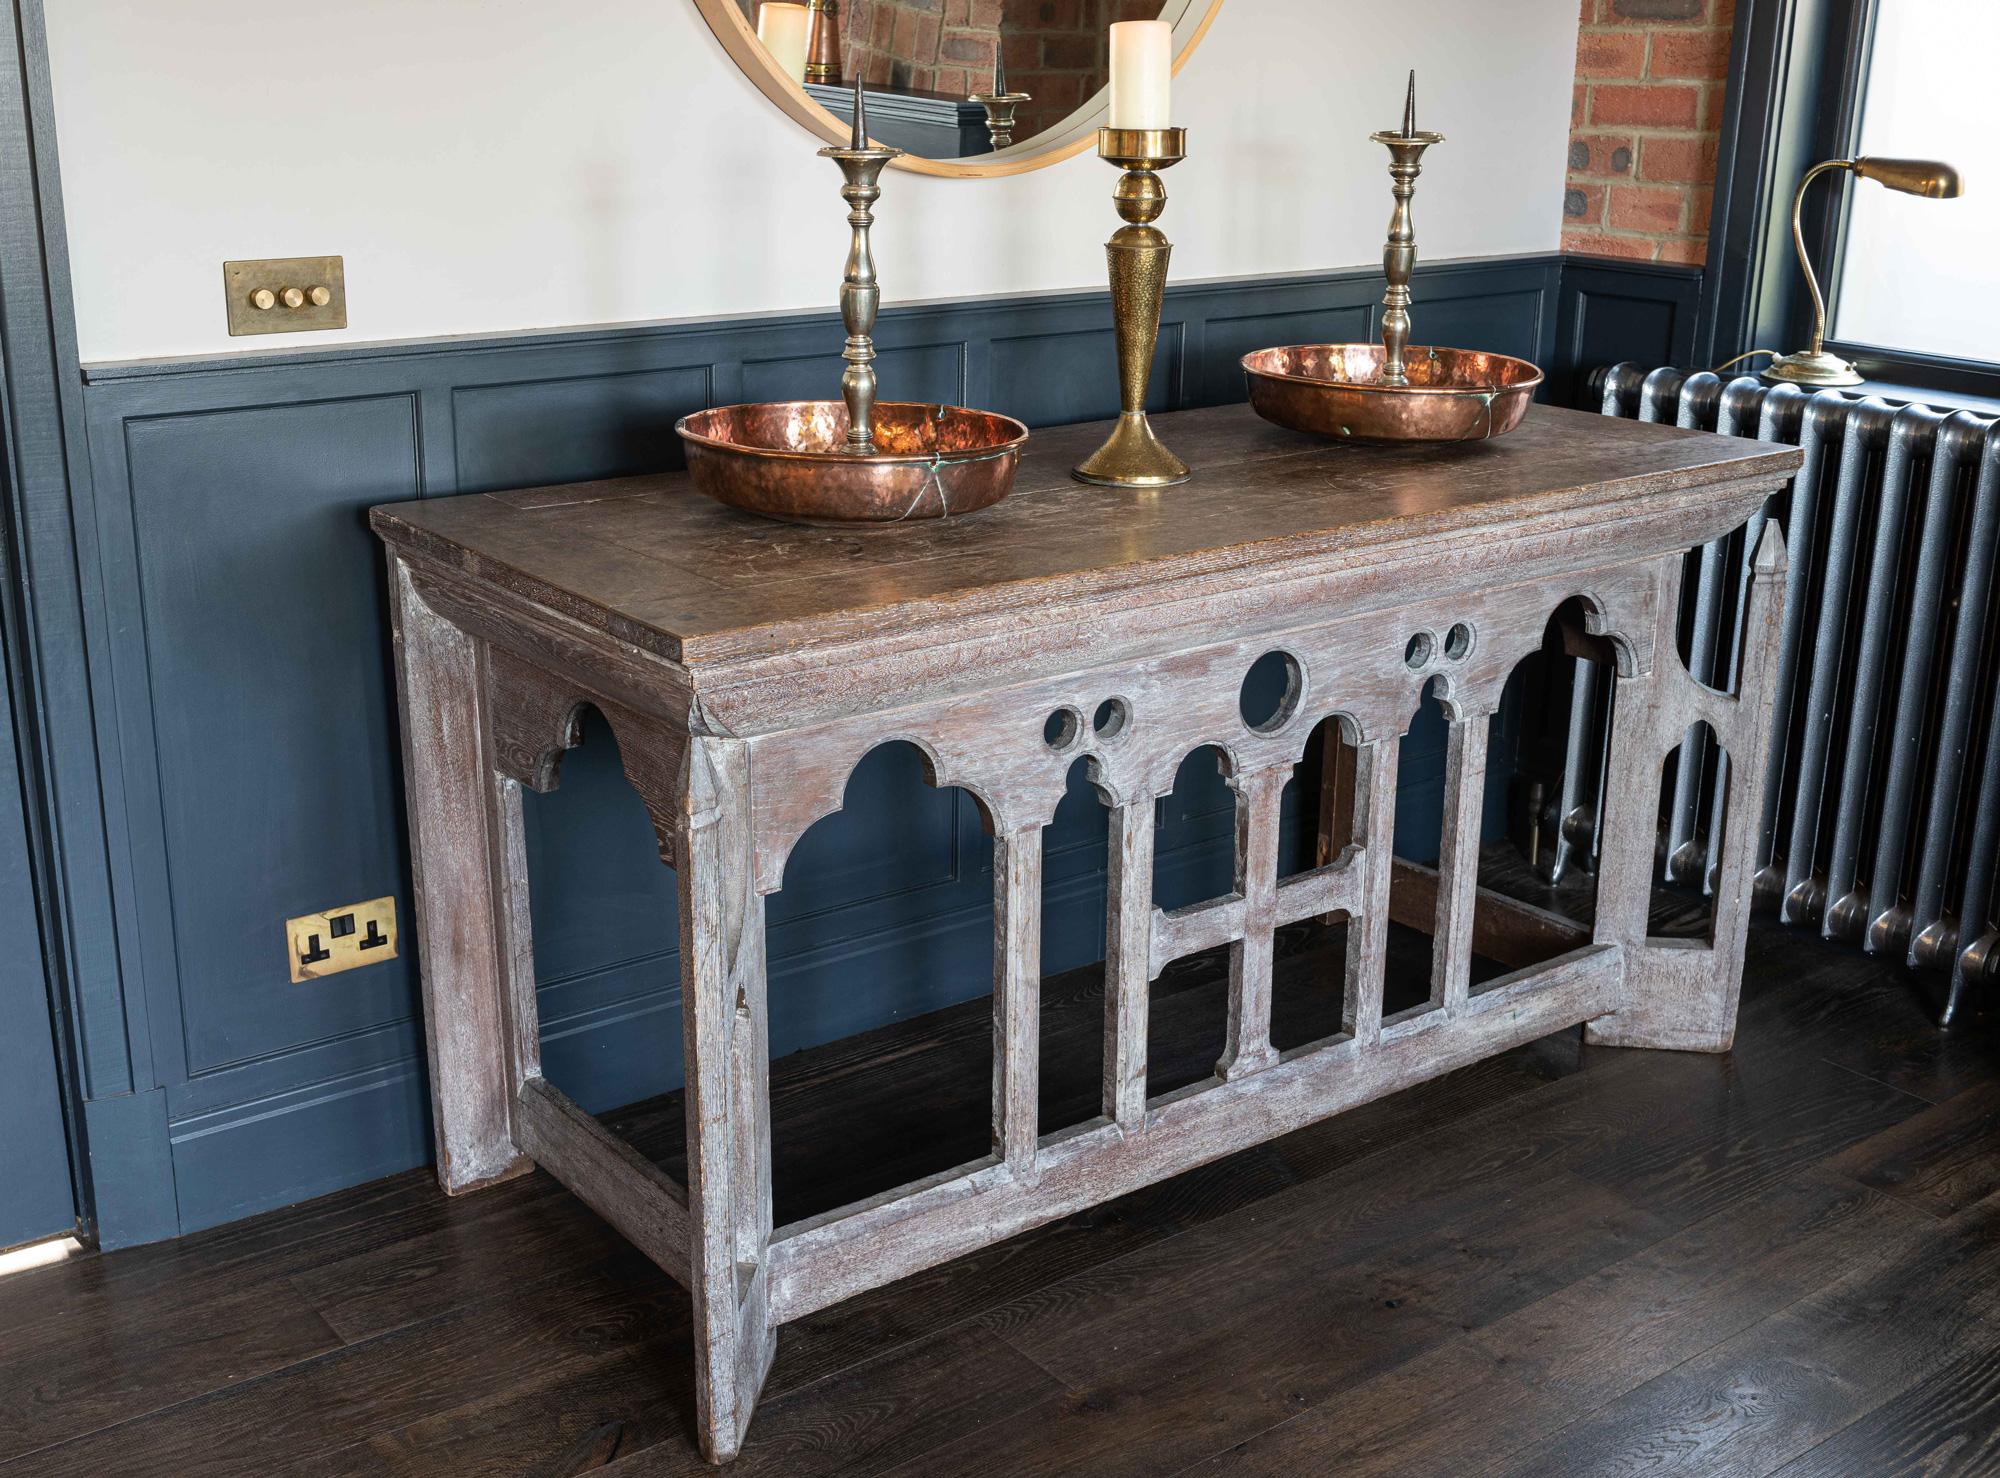 French oak limed Gothic alter table, circa 1880s

Would make a superb kitchen island or large serving table, or reception desk.
Table top is separate and lifts off the base to aid transportation

Measures: H 94, W 183, D 76CM.